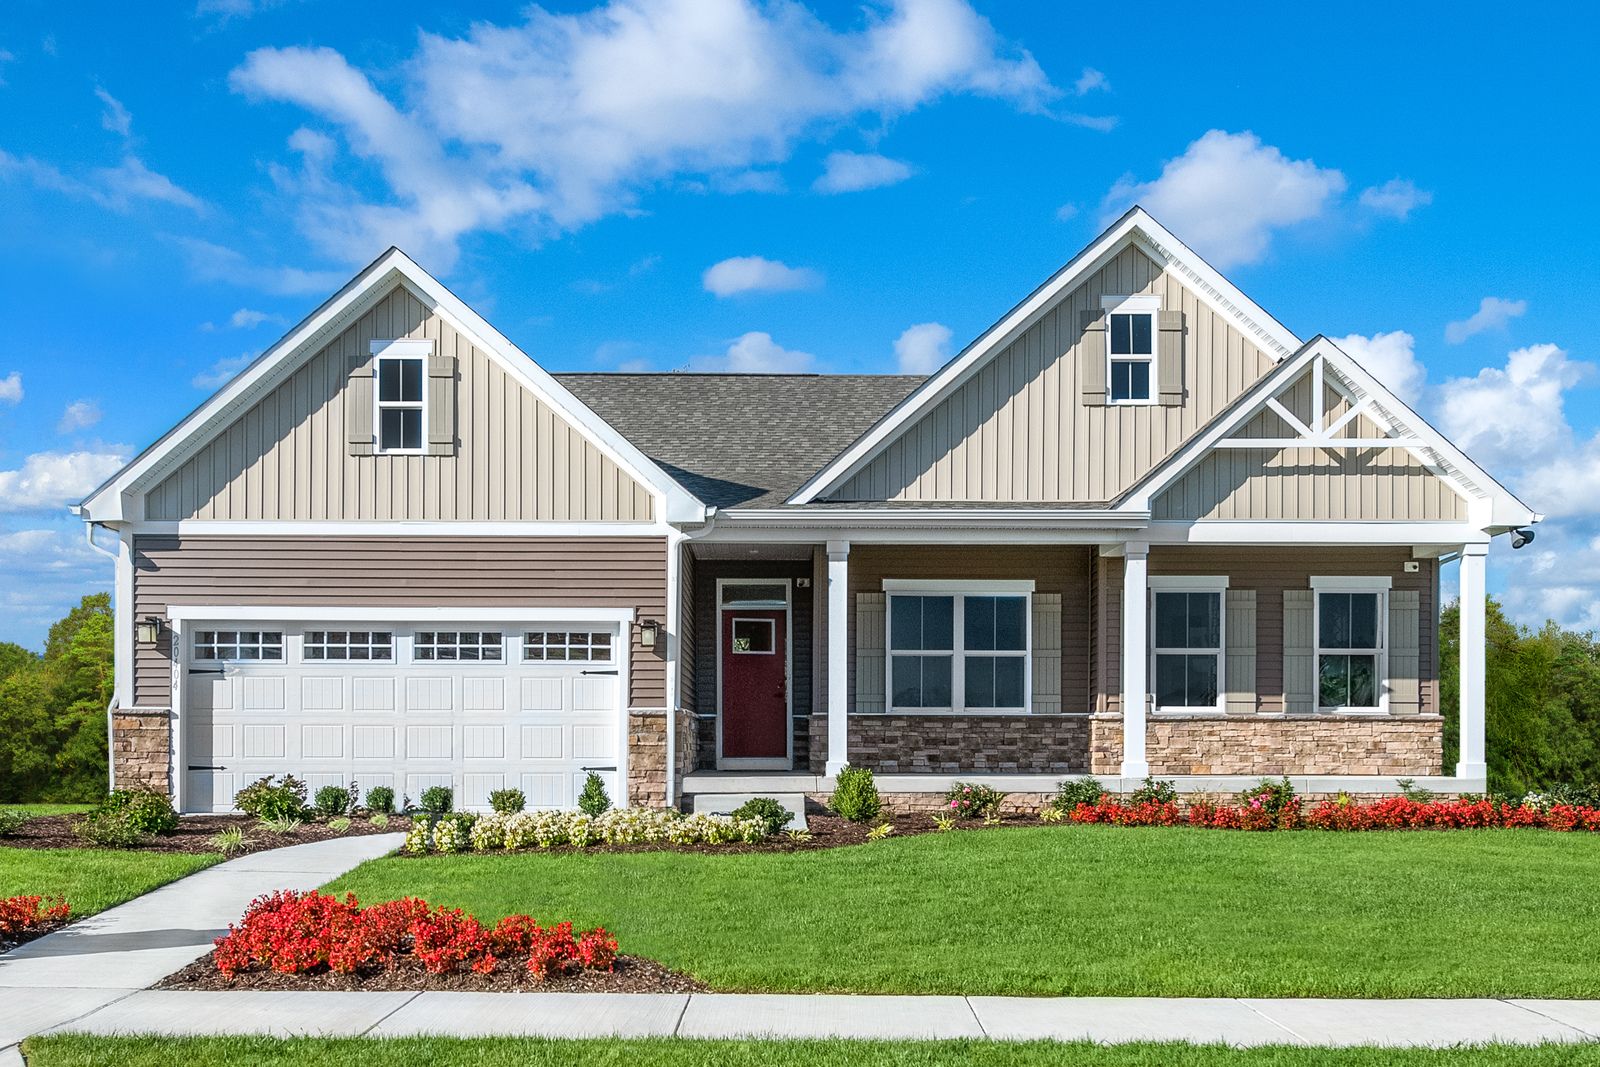 Craftsman-Style Homes in an Attractive, Established Community